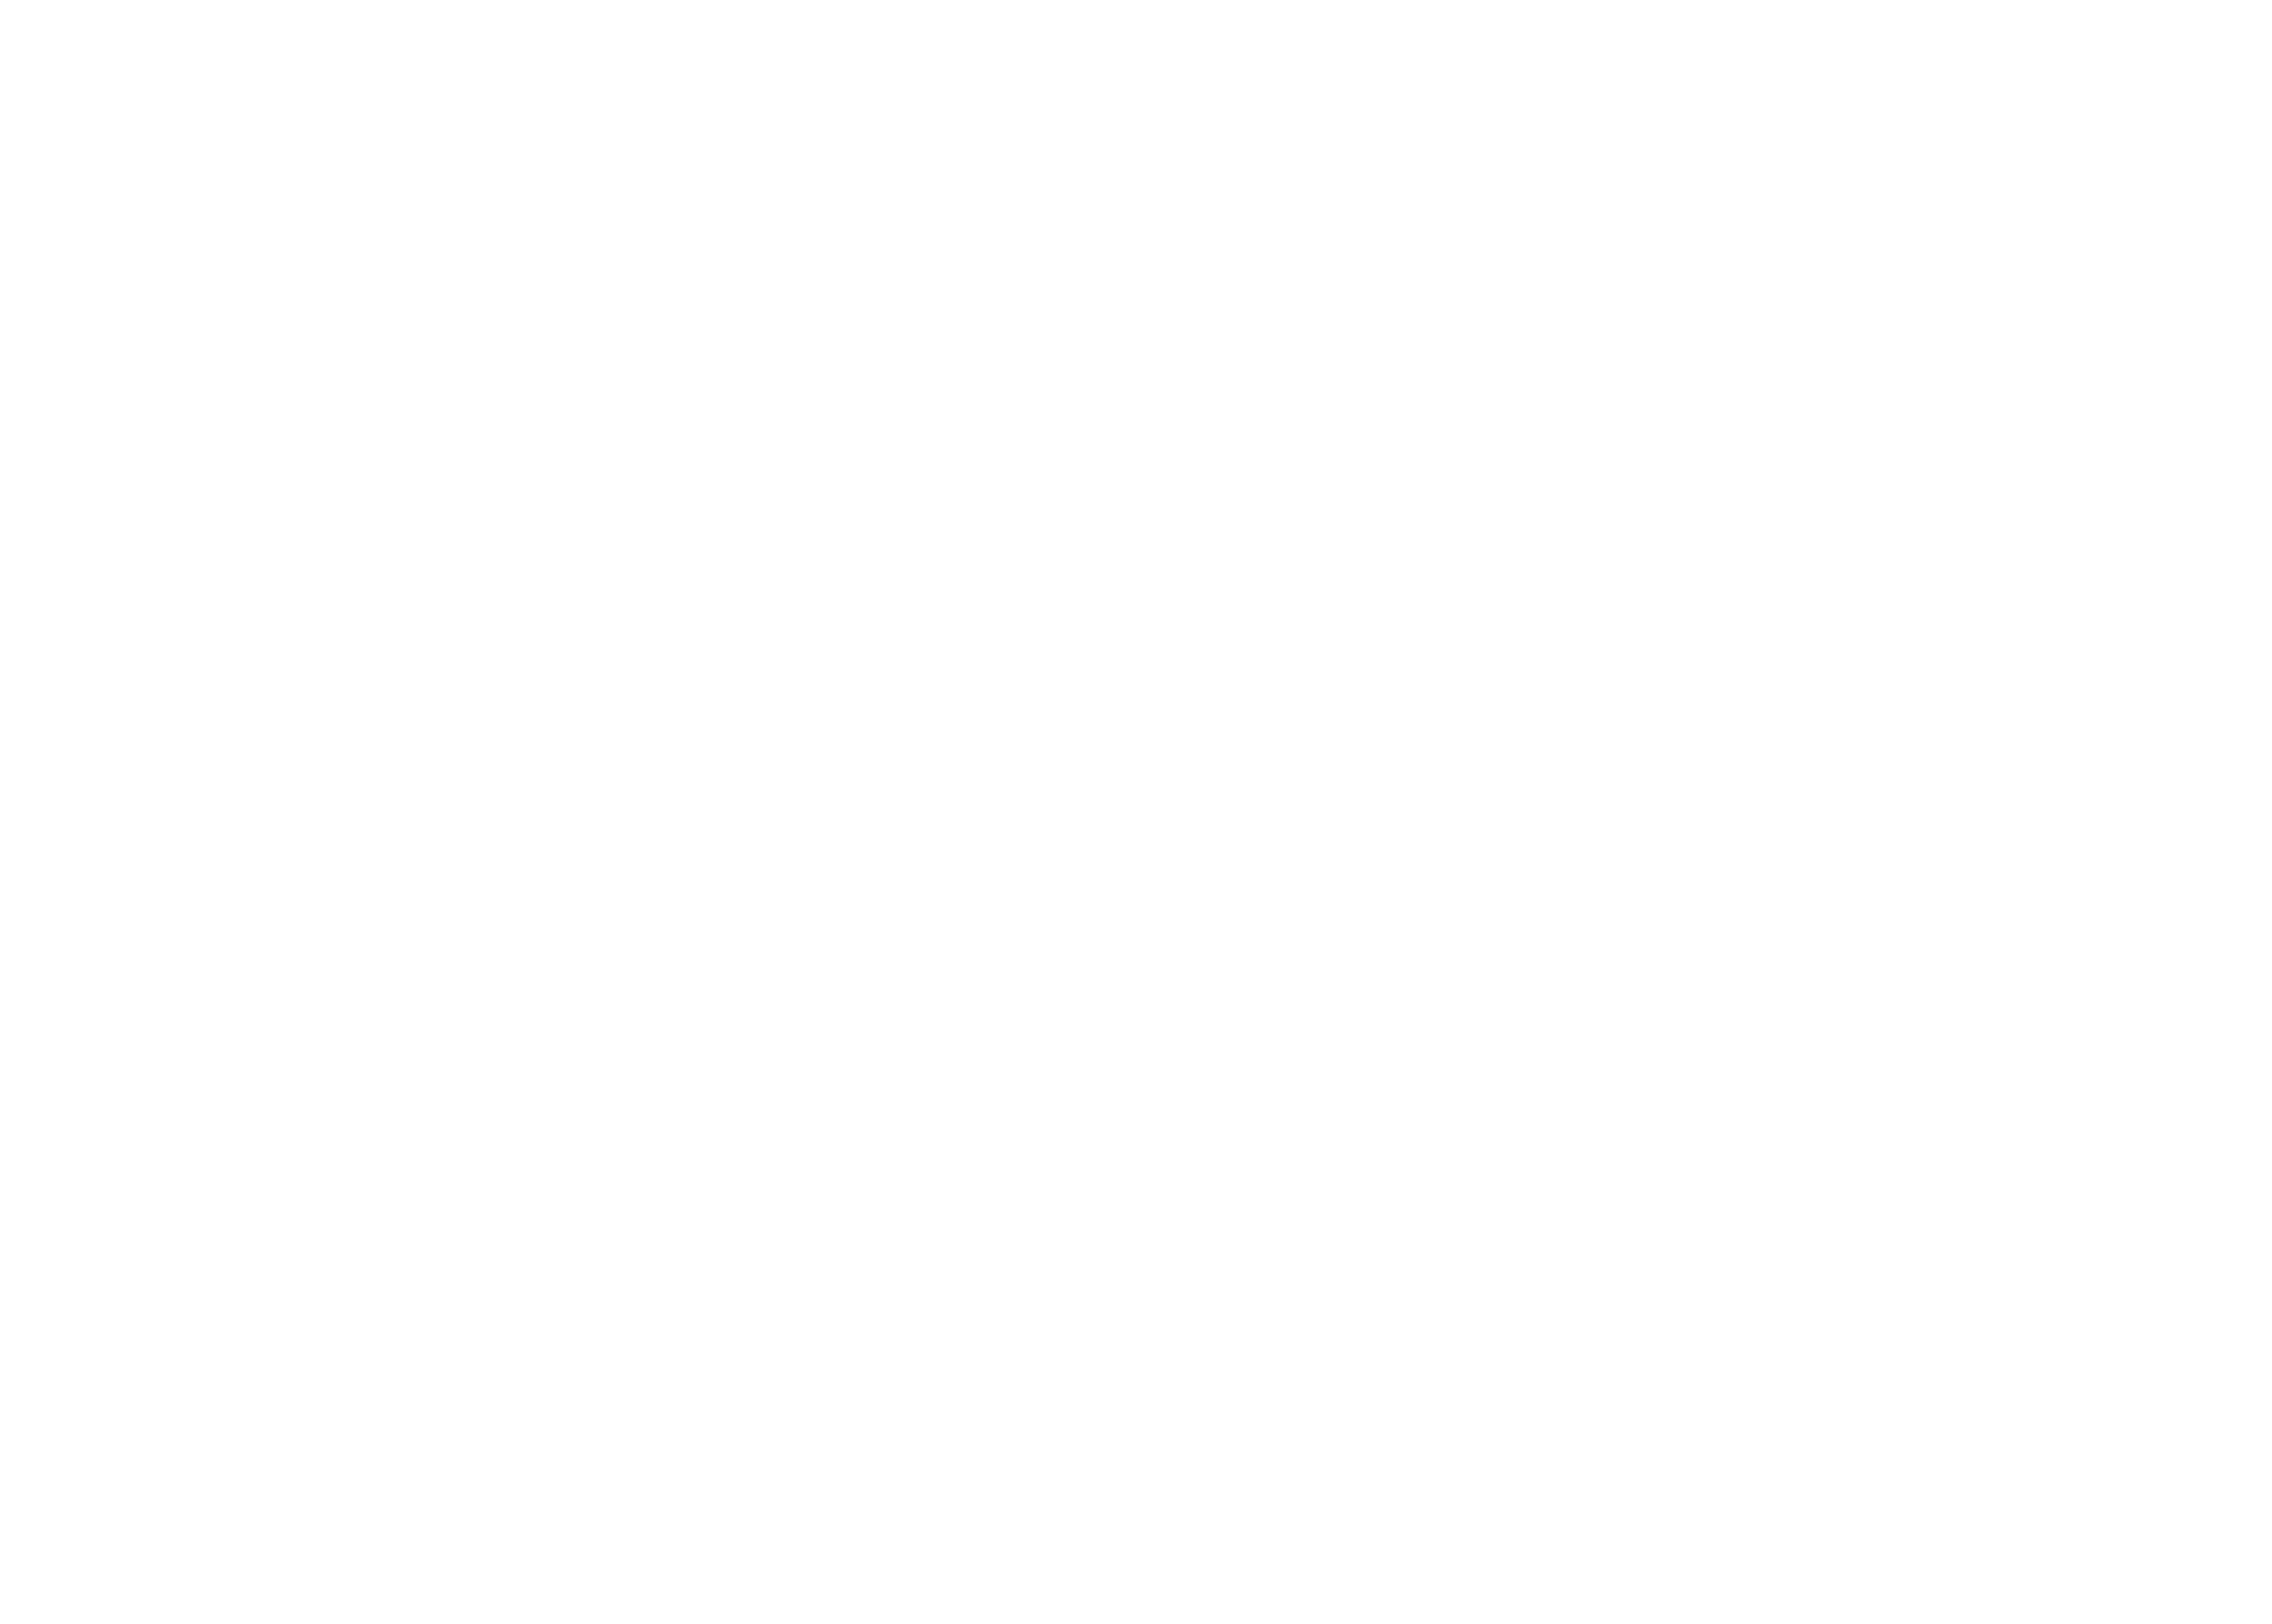 ShowTower Live